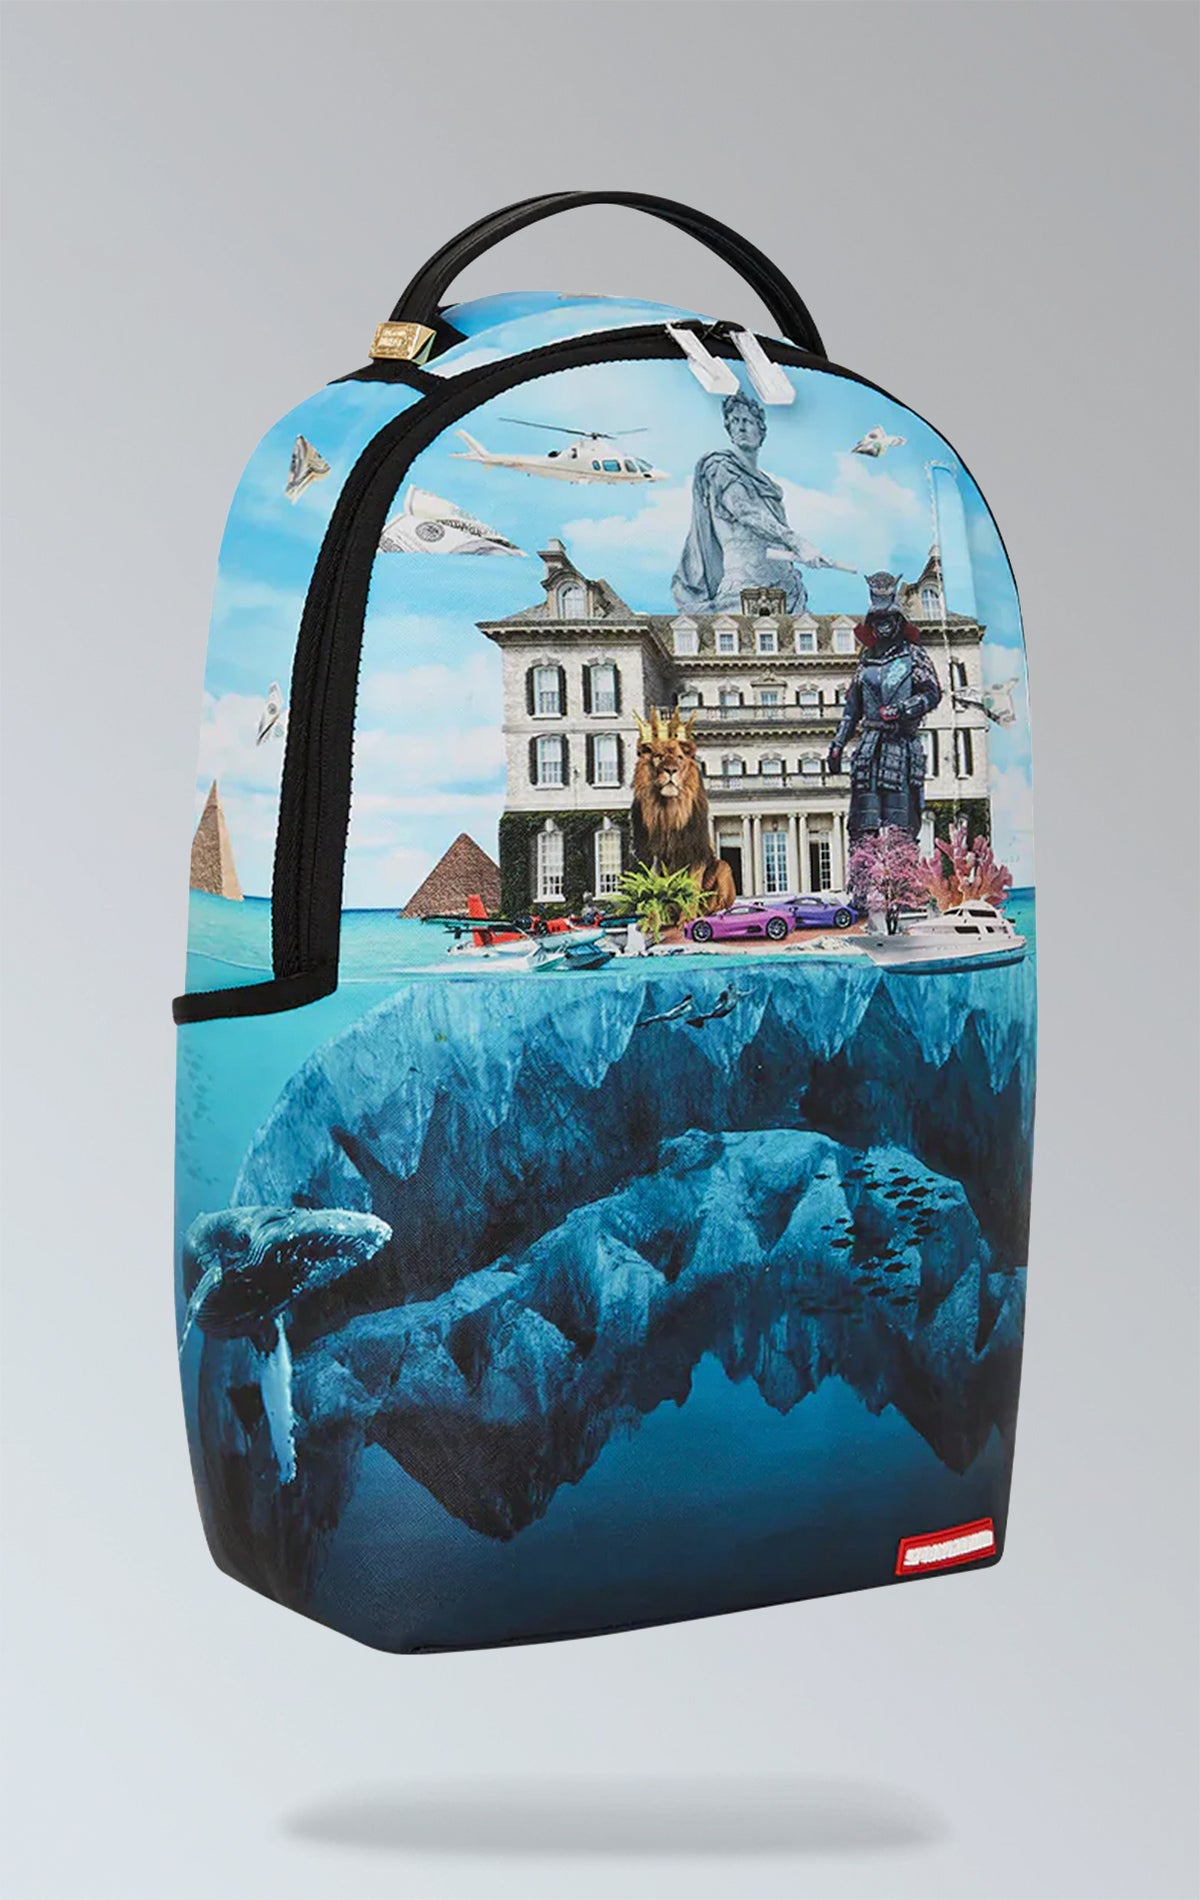 Eye-catching blue Sprayground backpack featuring artwork of a luxury mansion atop a shark, with separate laptop & sunglasses compartments, padded back, and luggage sleeve.